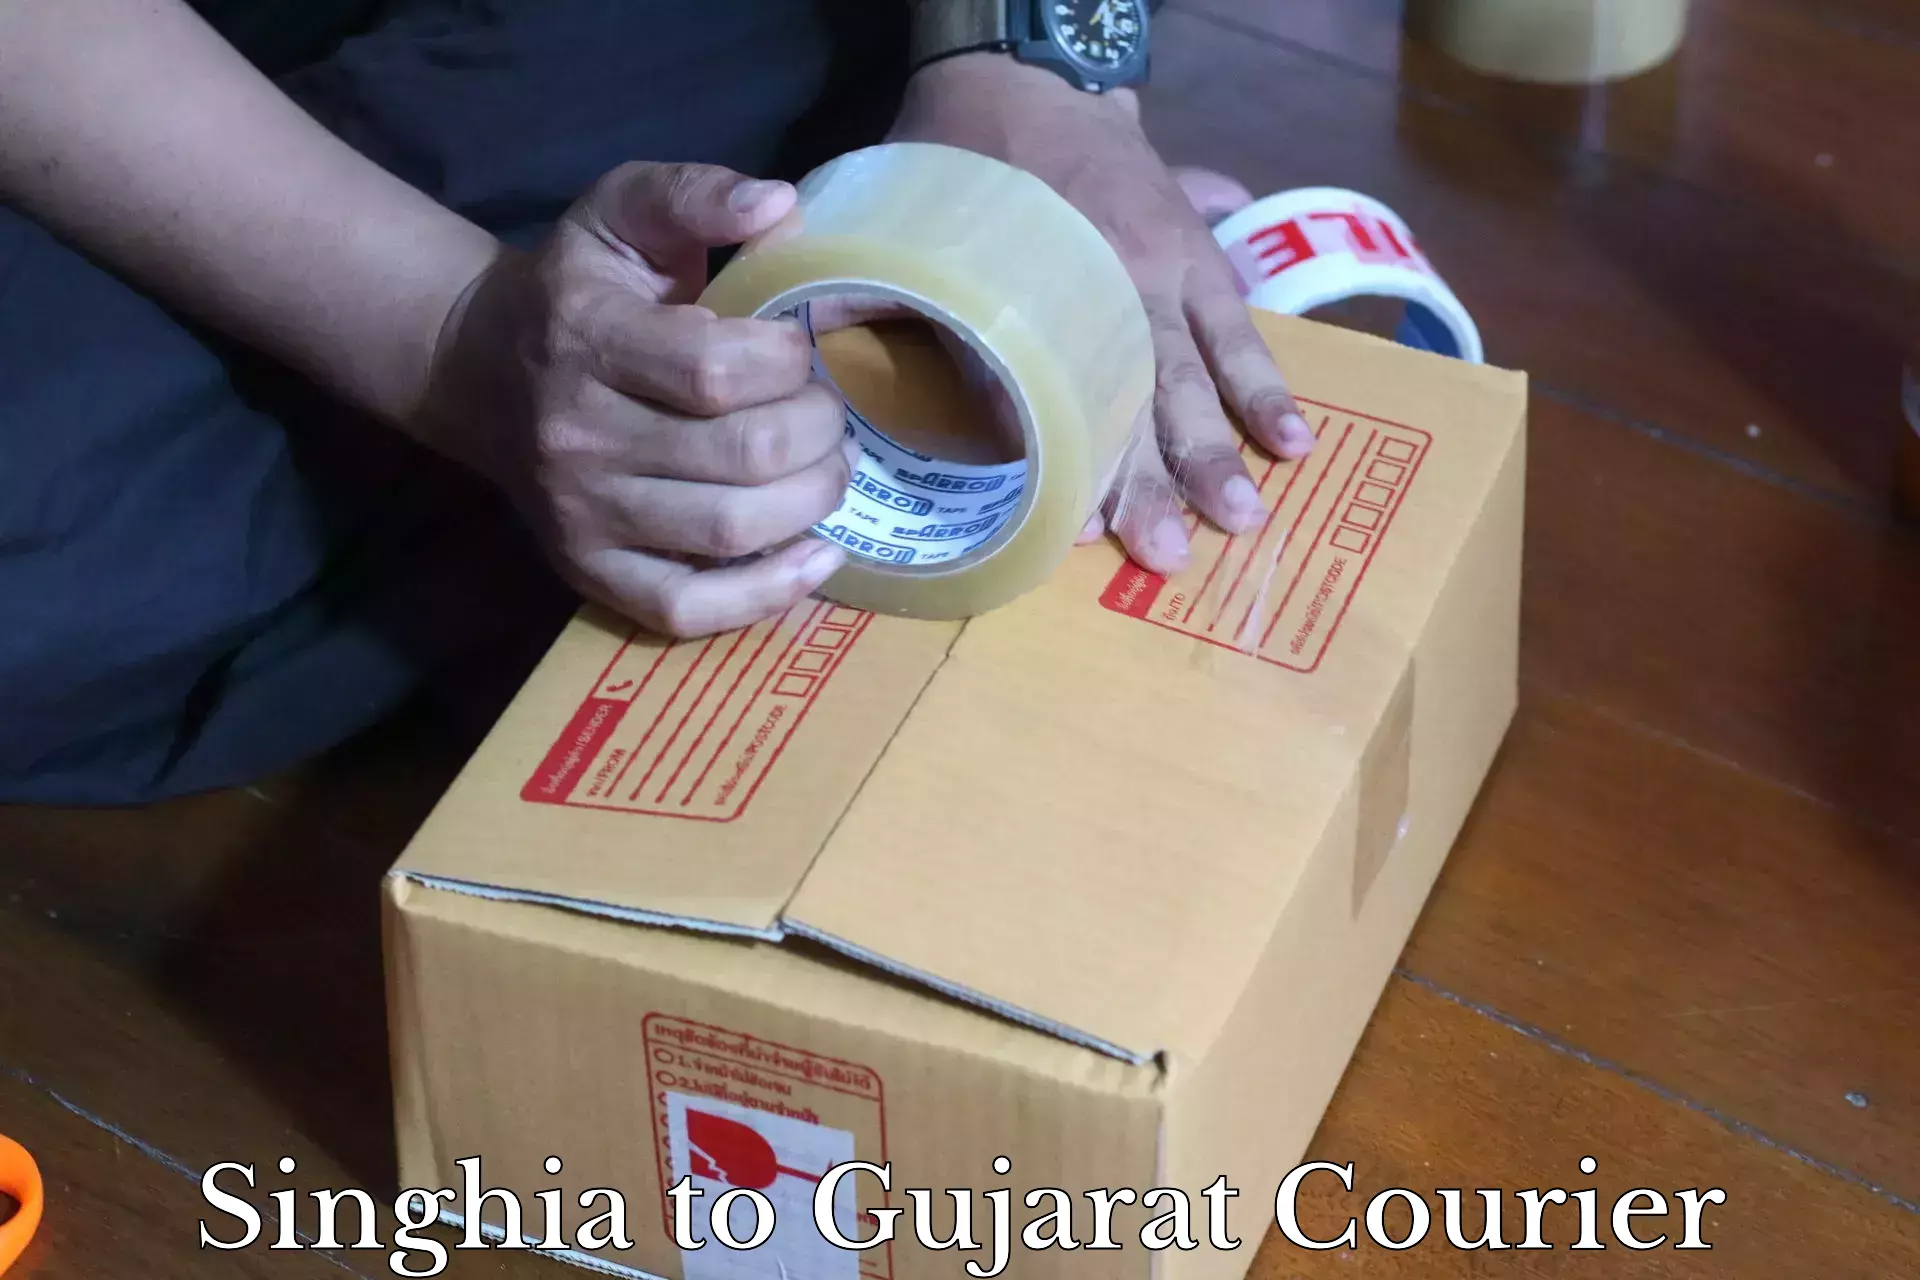 On-call courier service Singhia to Gujarat